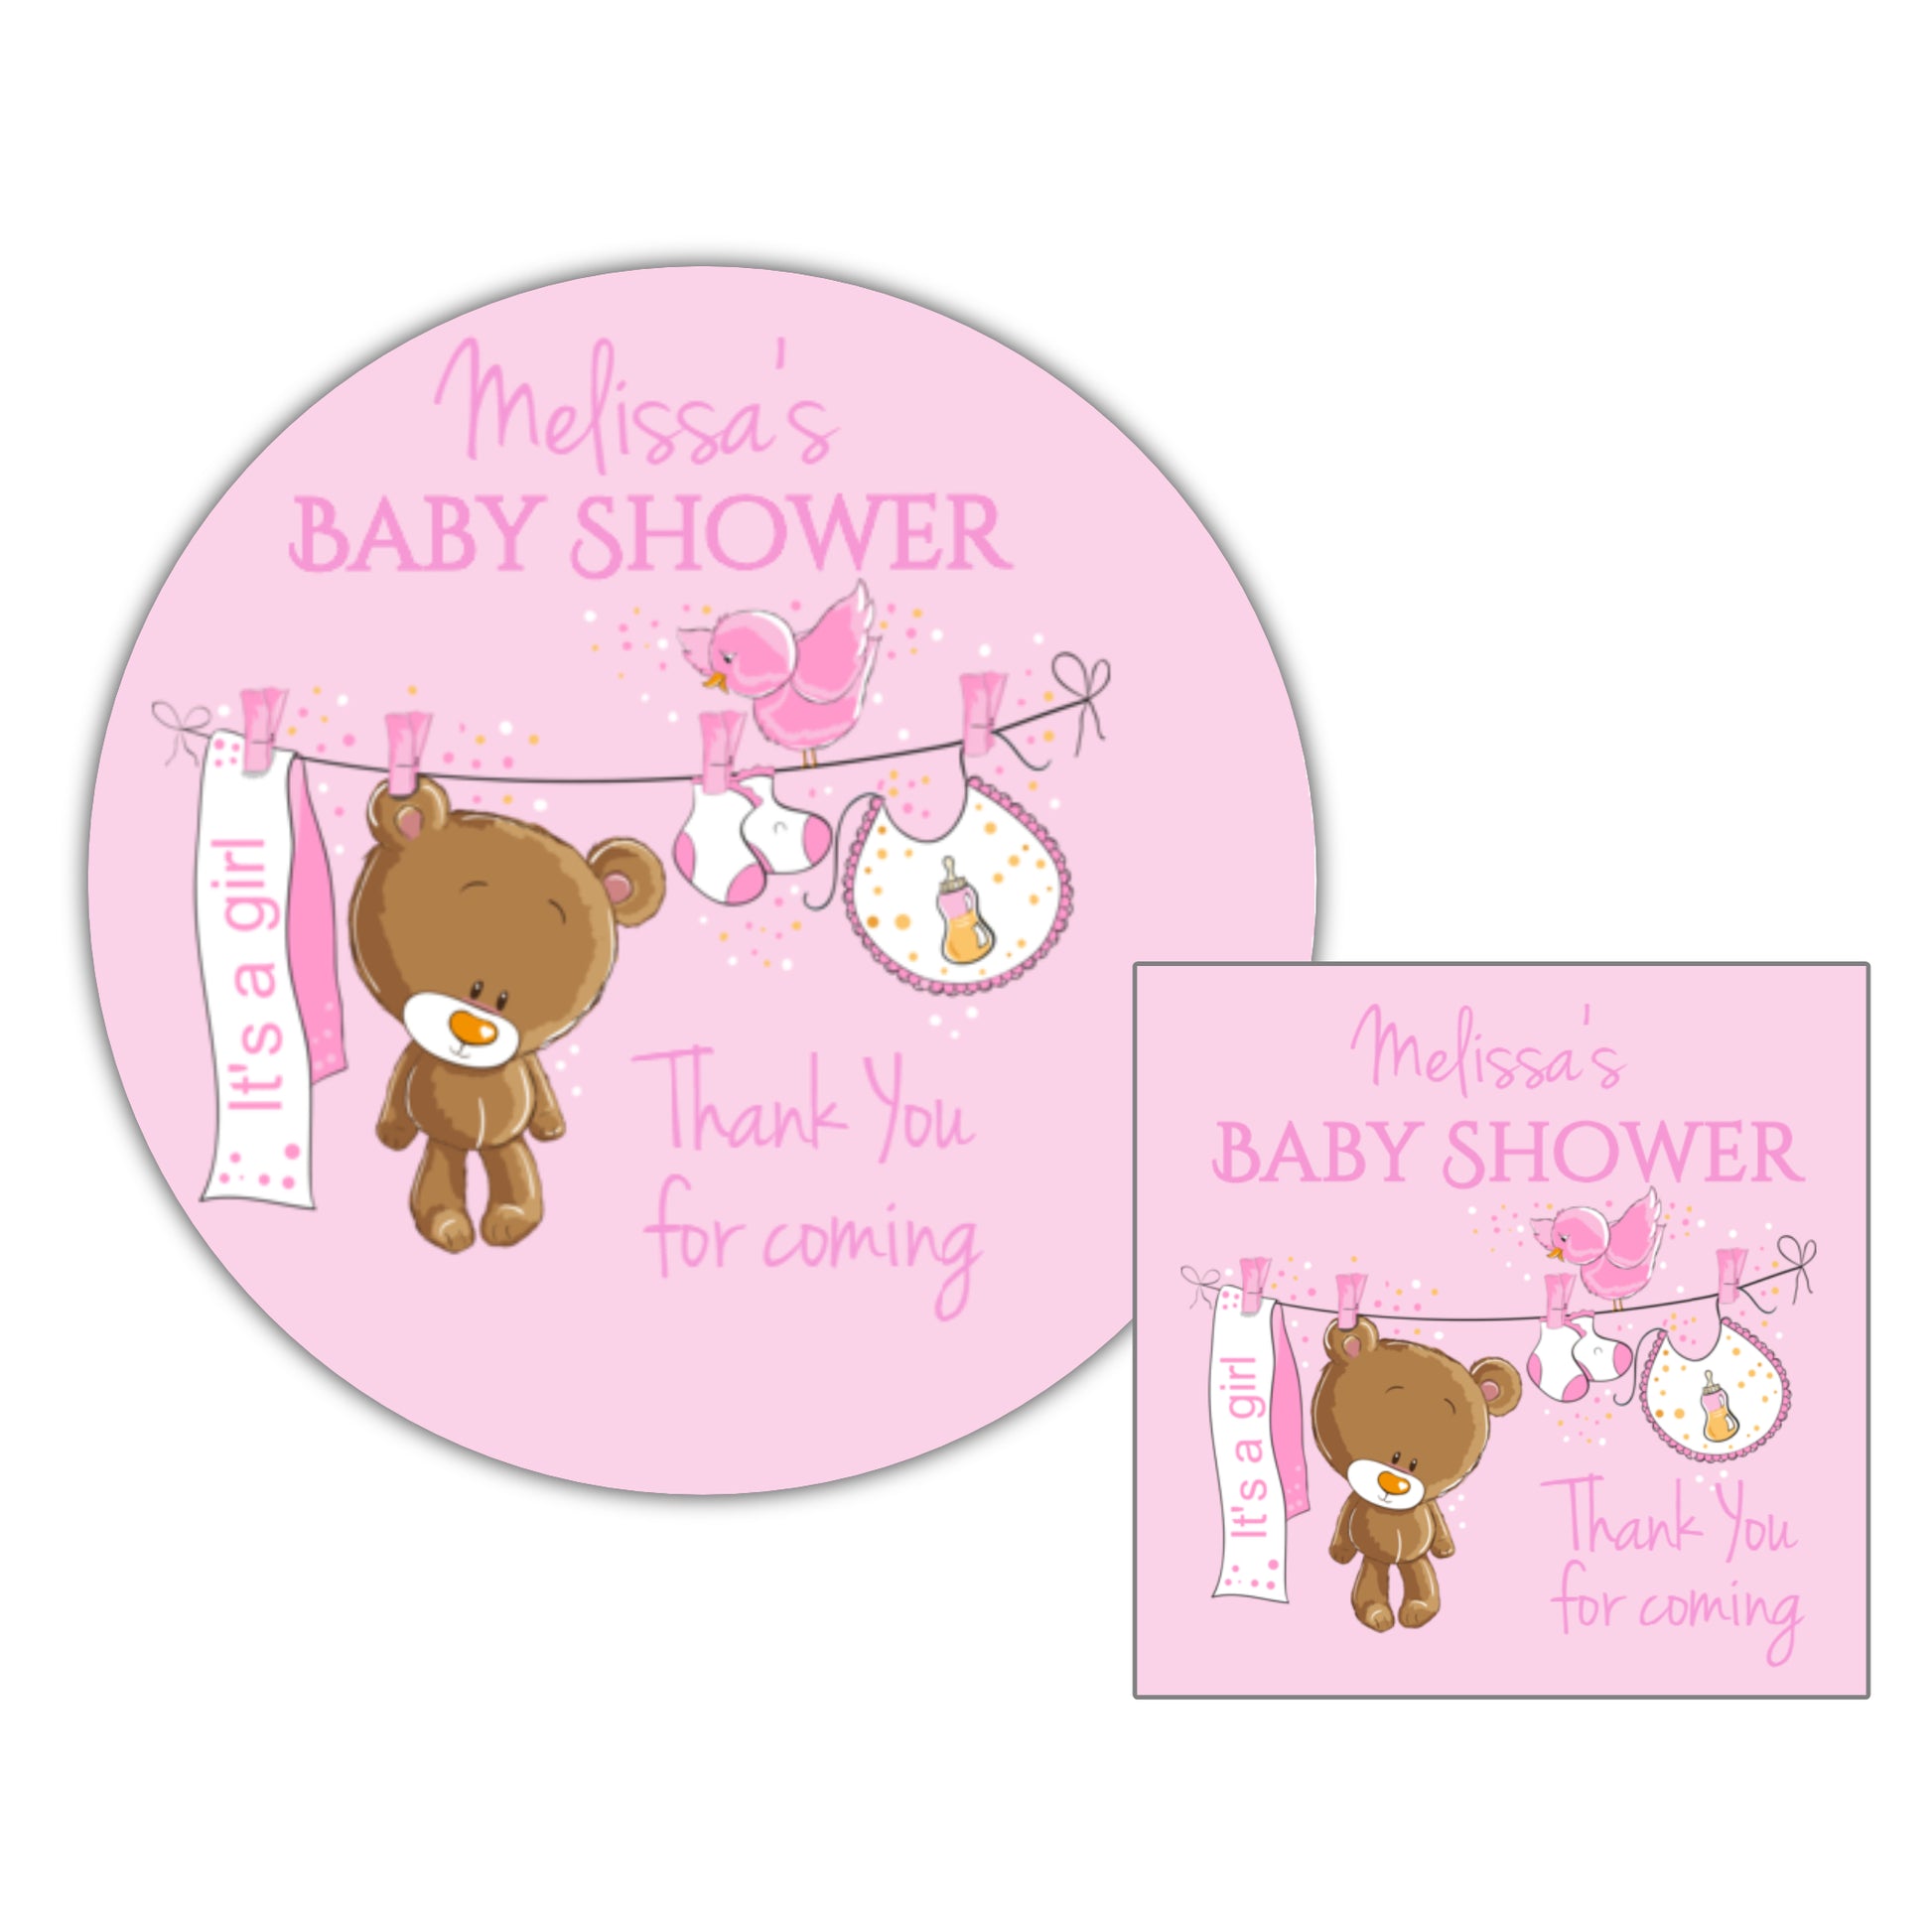 a pink baby shower sign with a teddy bear on it